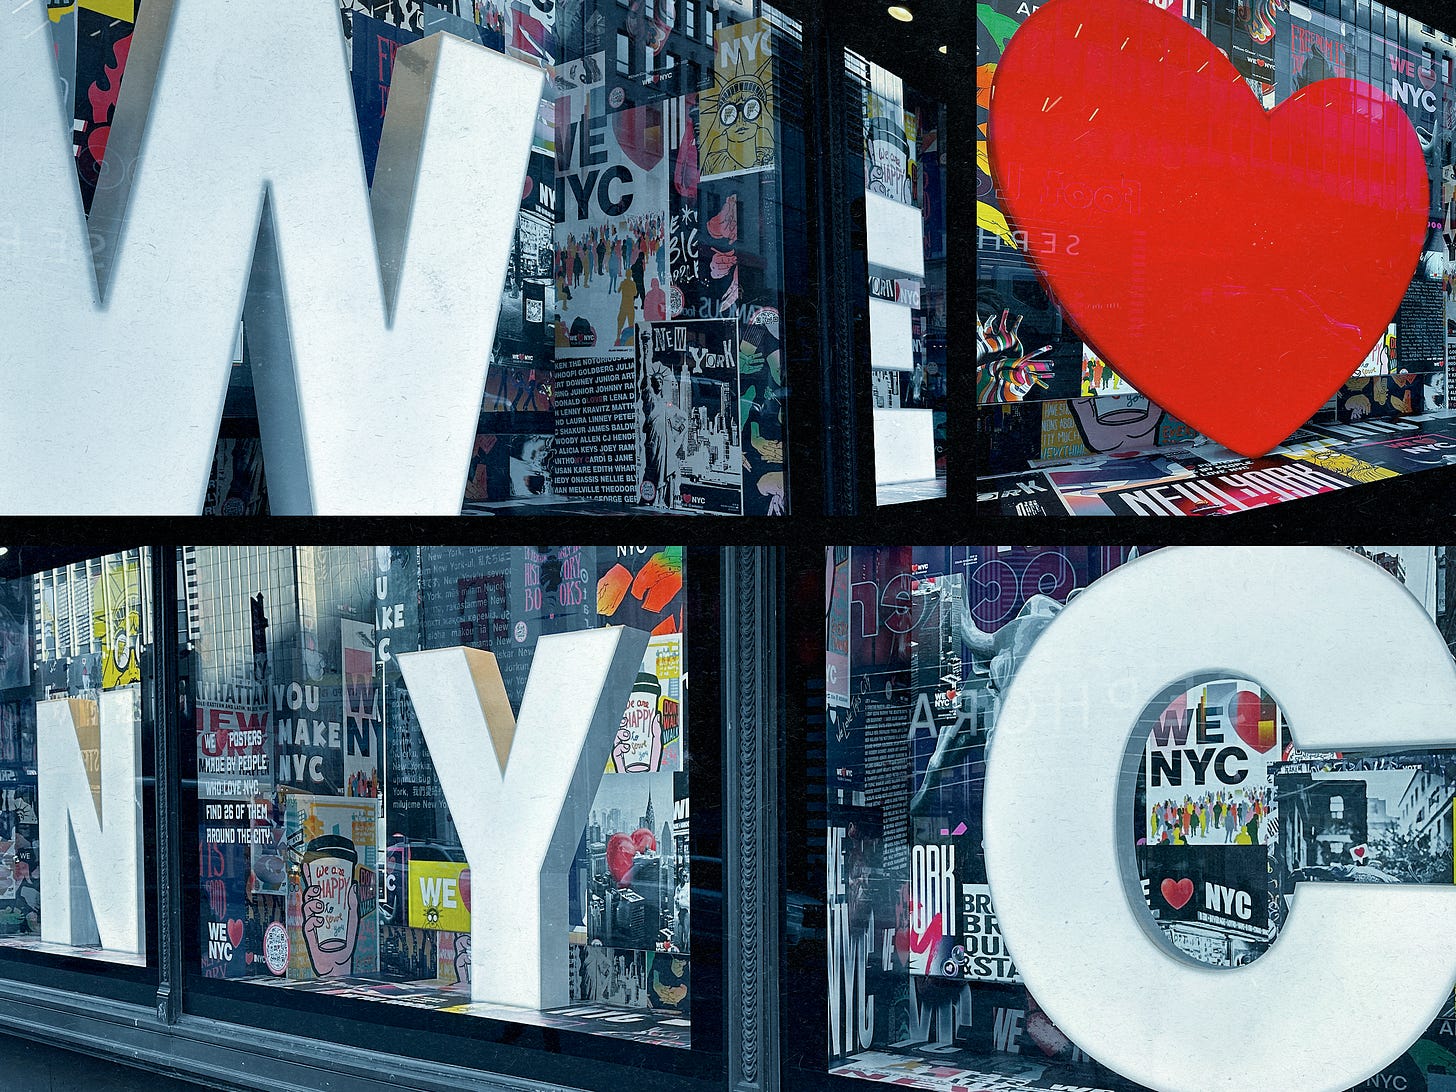 A montage of photos of a retail window at Macy's department store, each featuring part of the new We Love NYC campaign